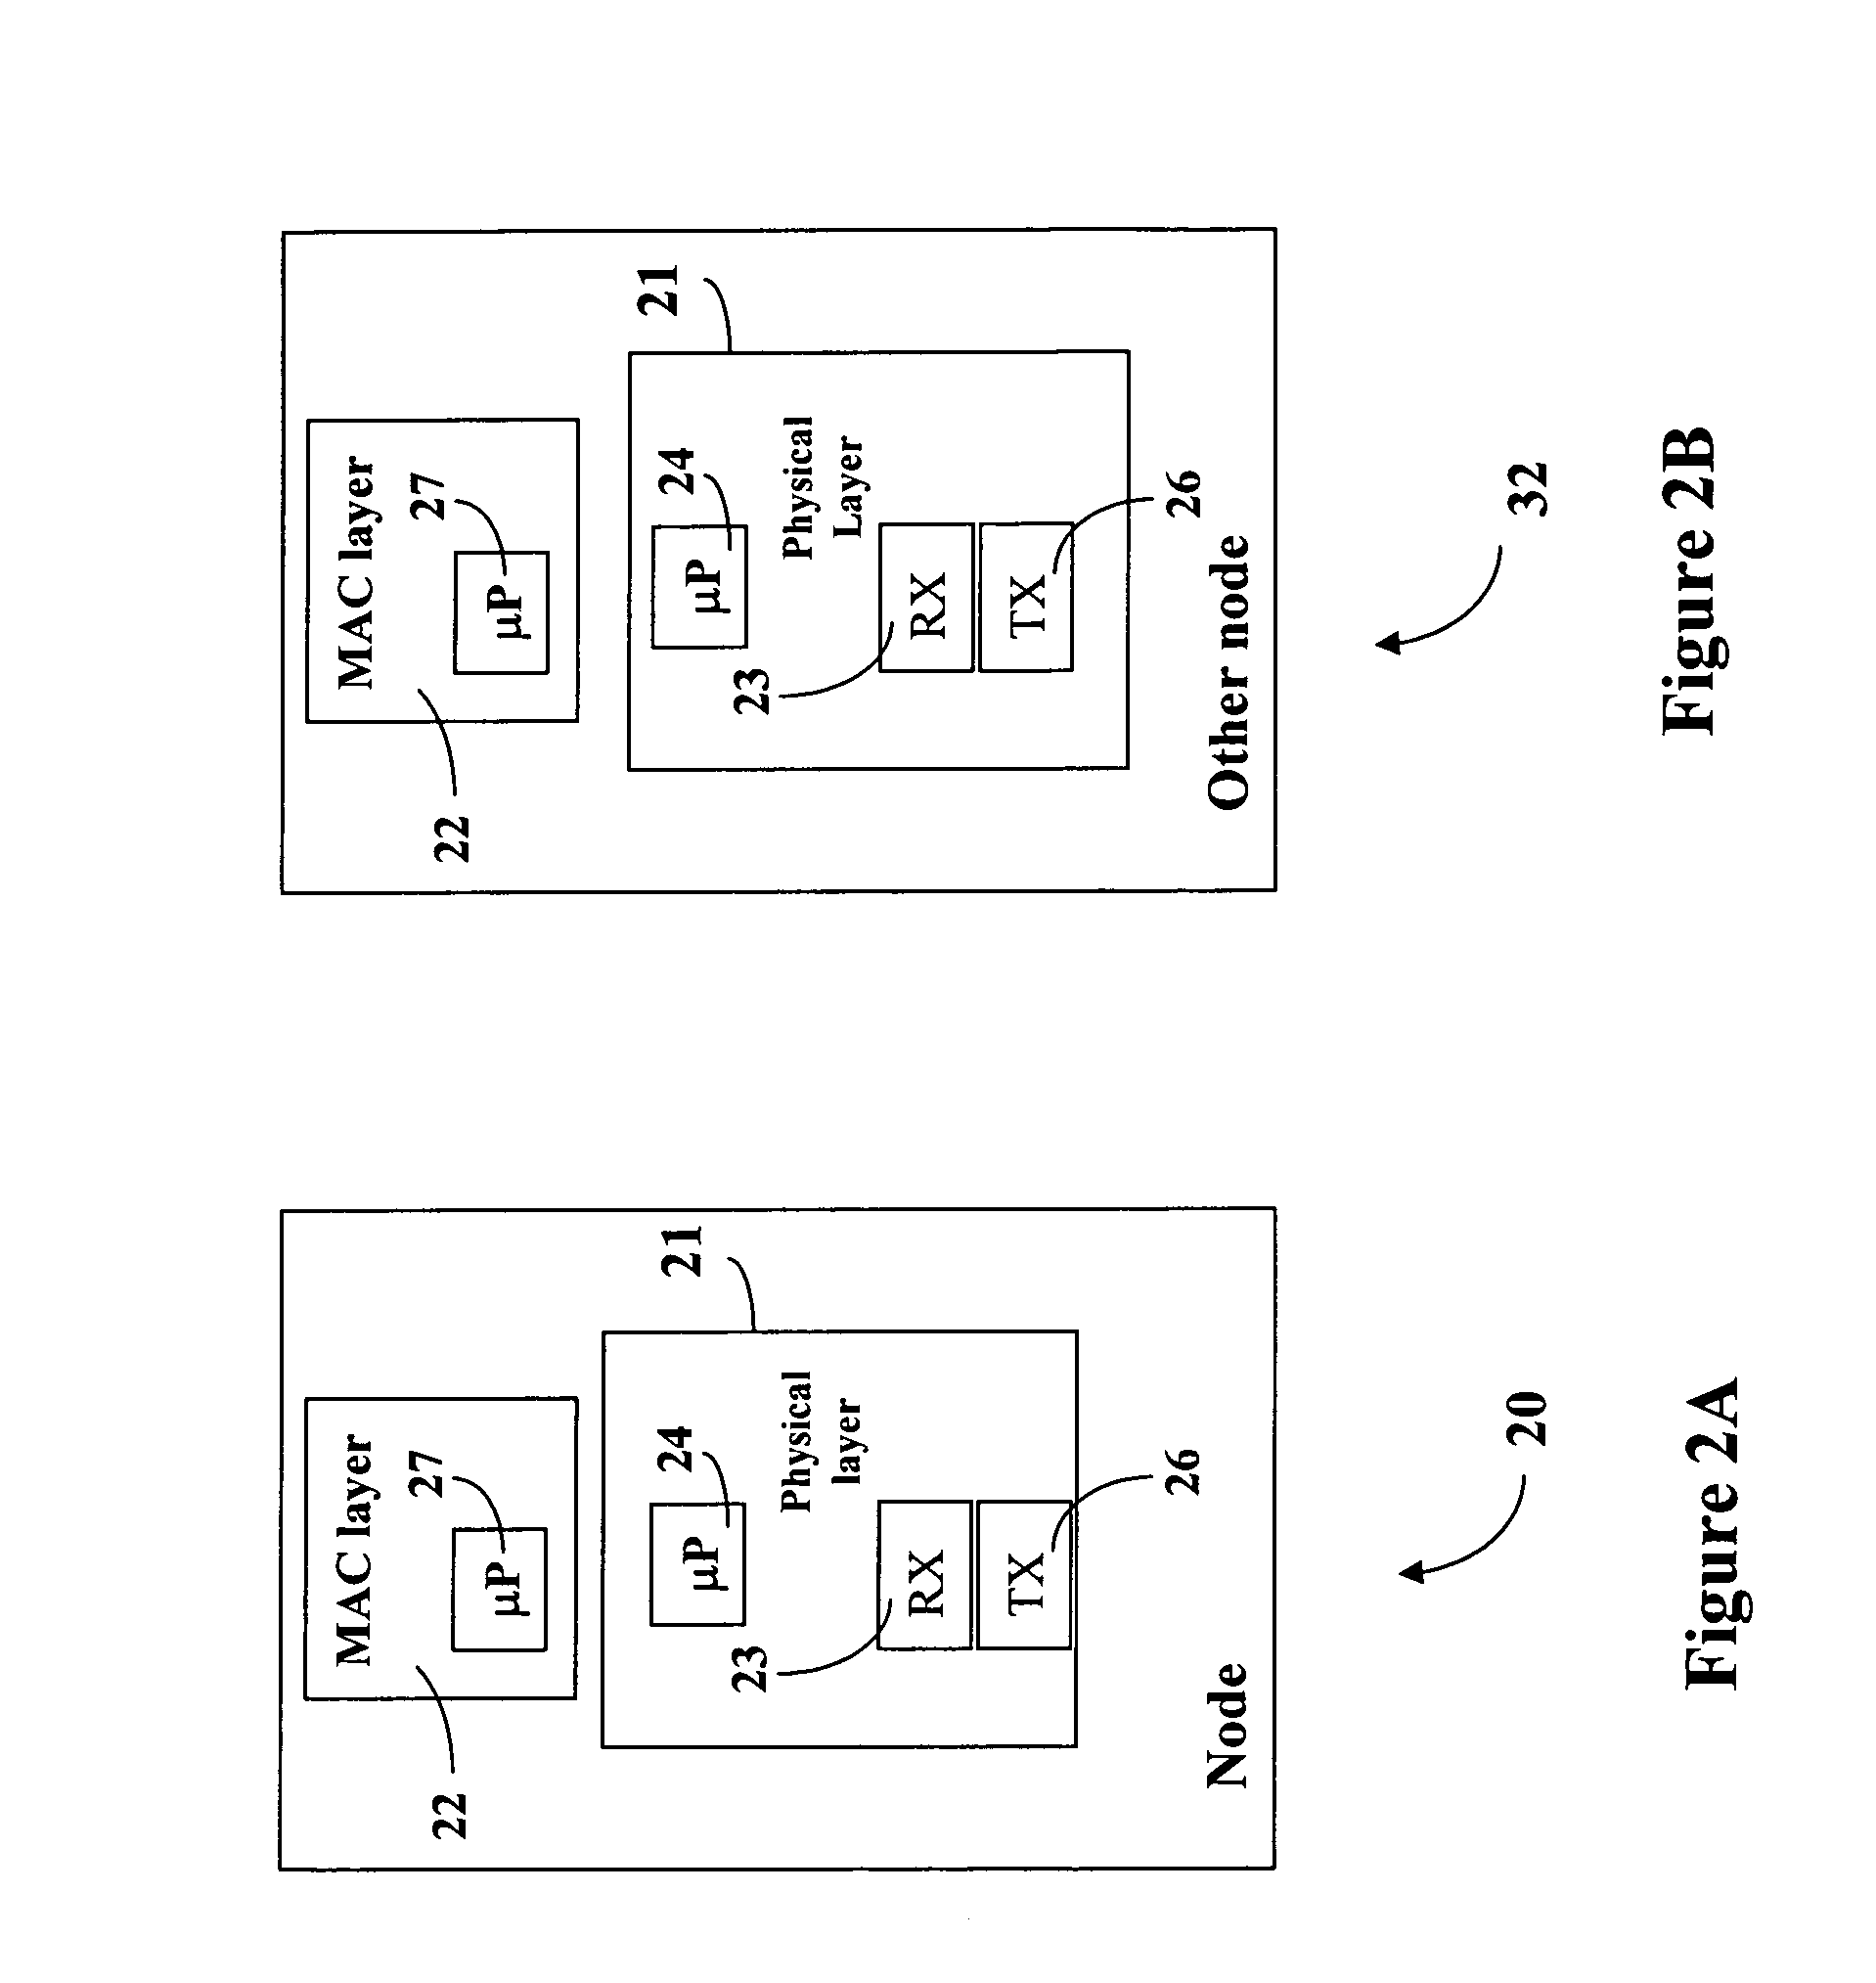 System and method to perform stable distributed power control in a wireless network